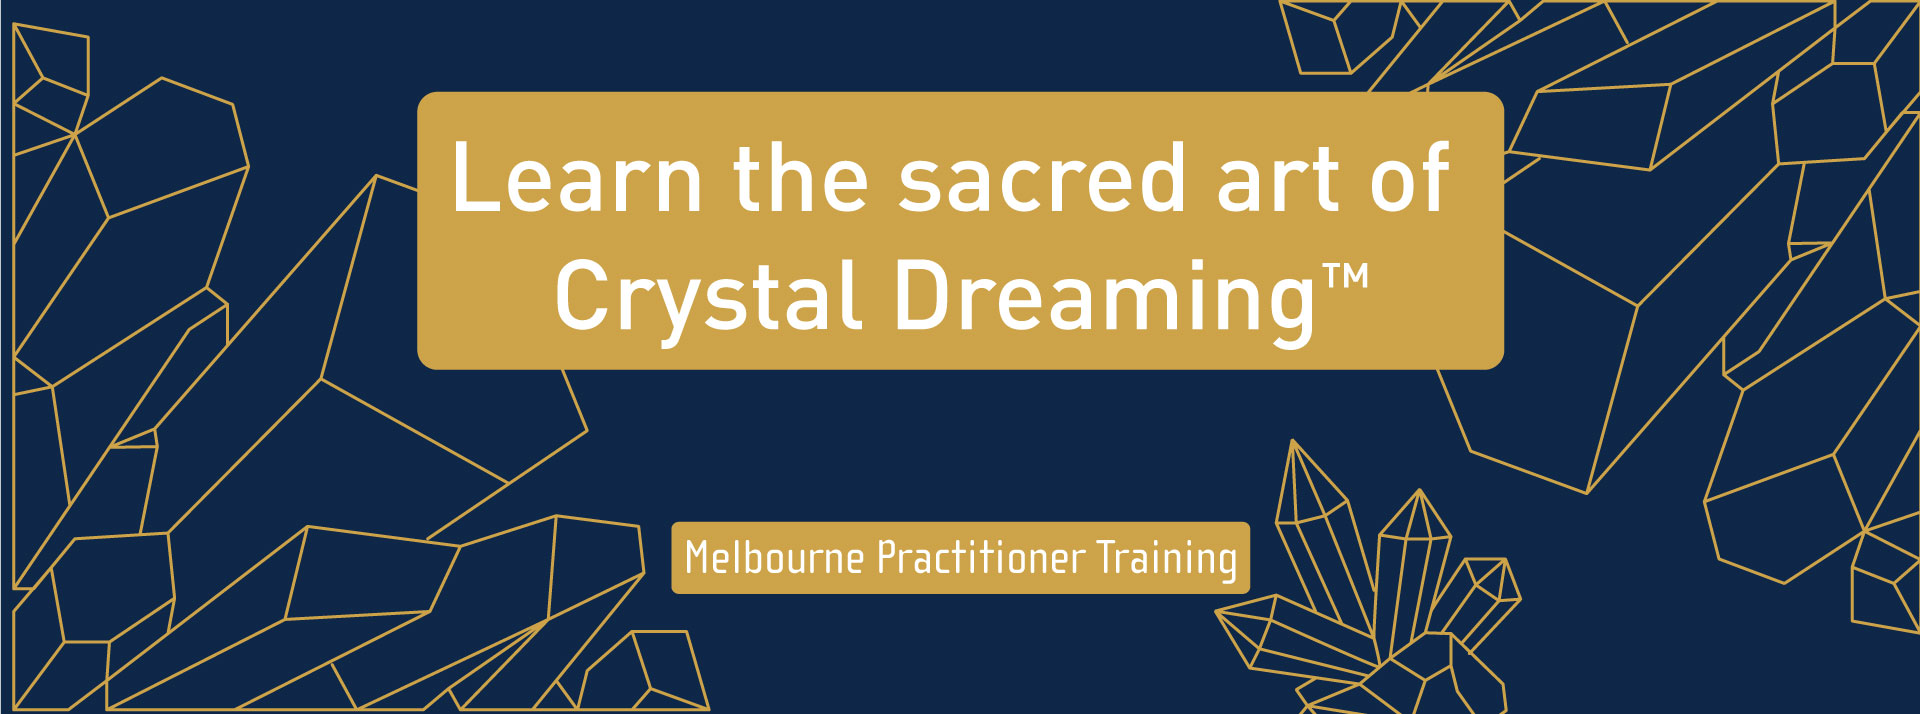 Crystal Dreaming Practitioner Training